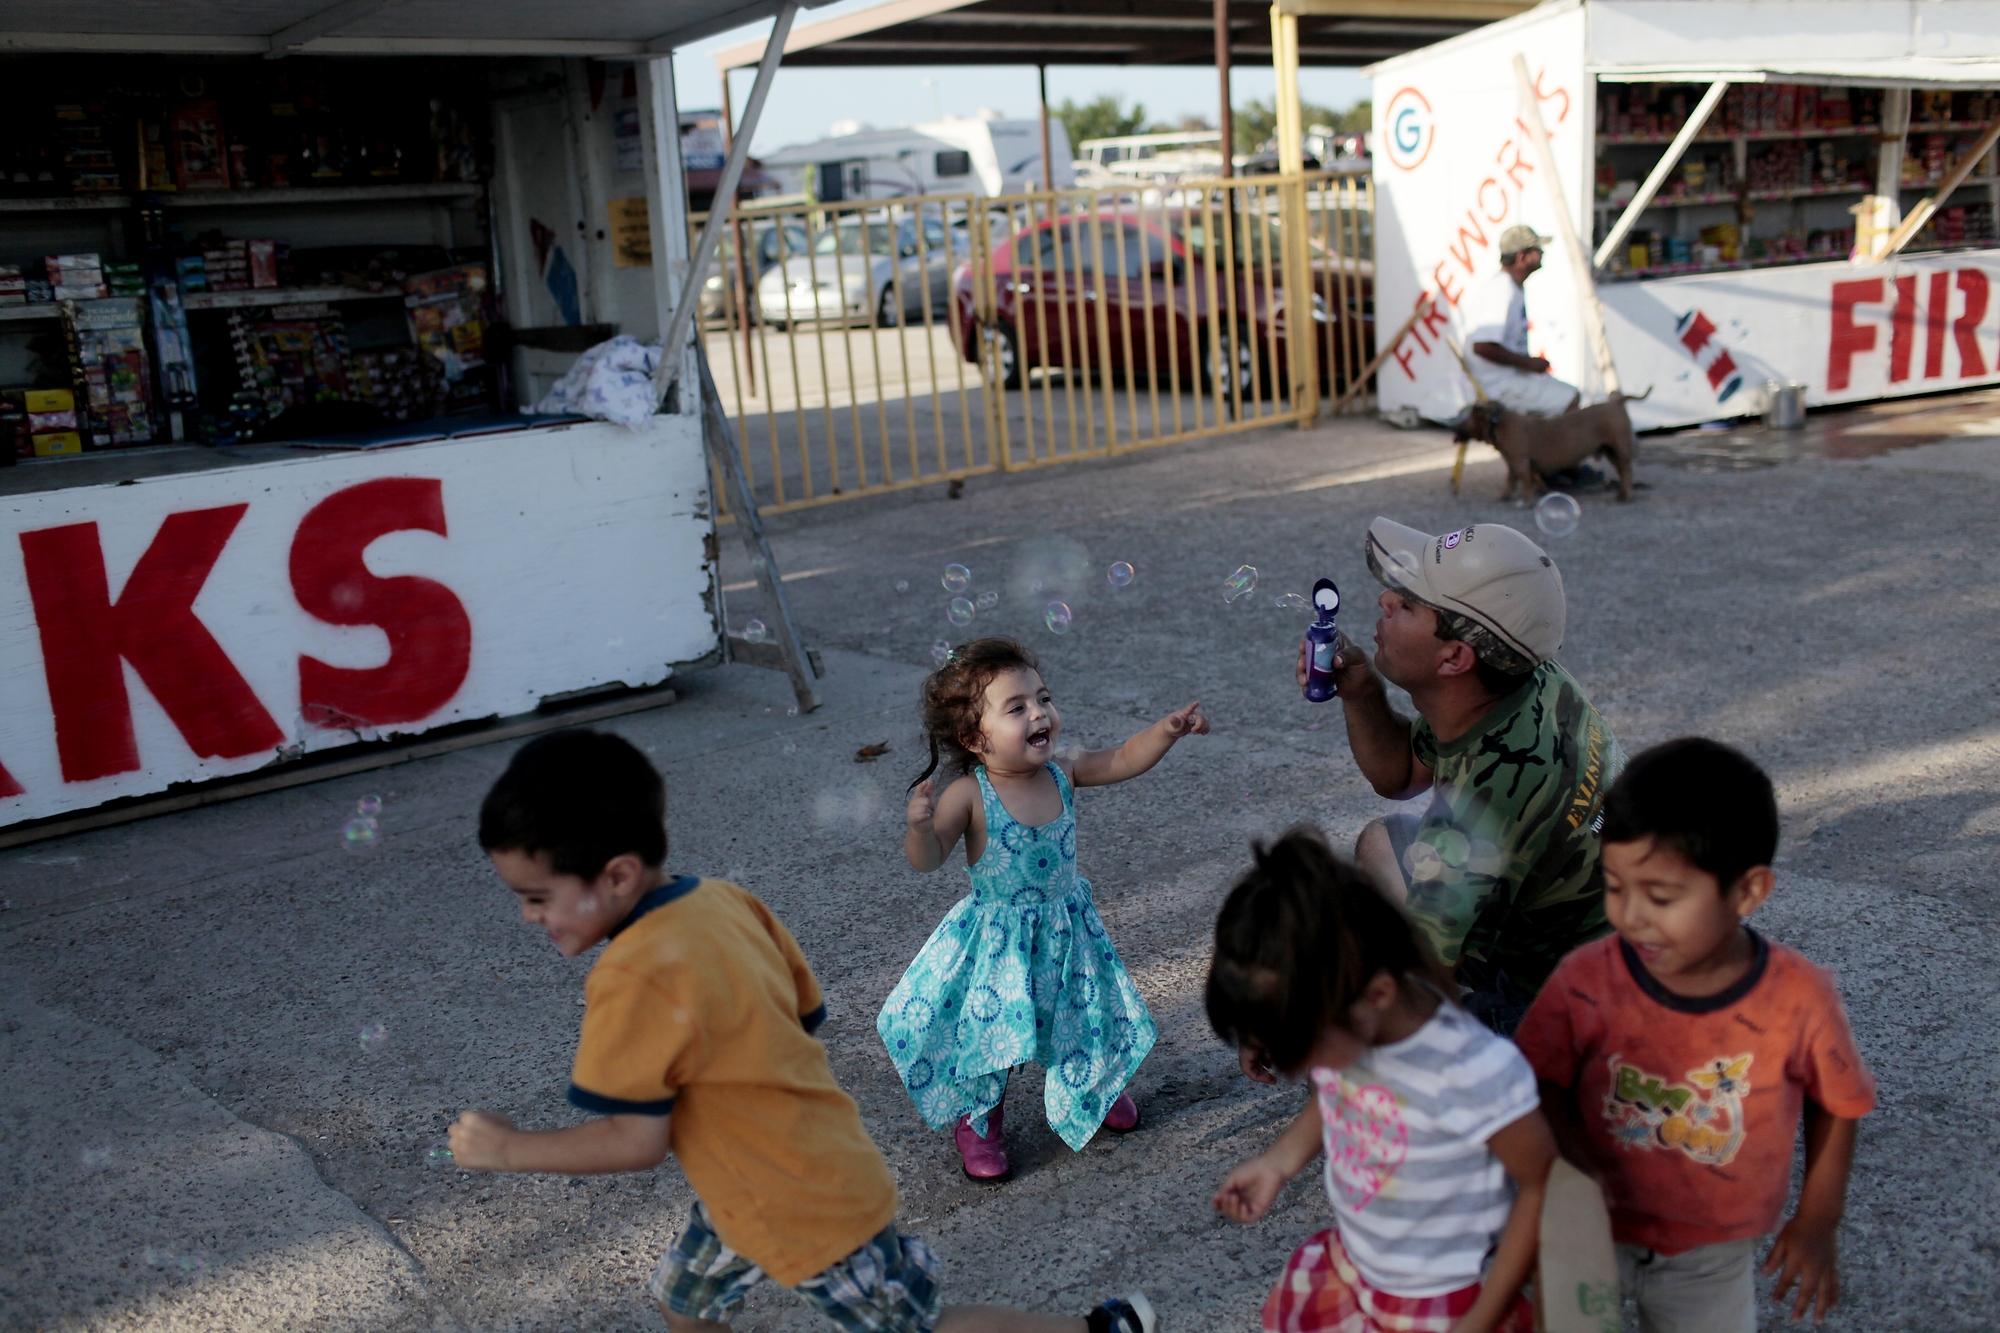 Gregorio plays with his daugther, Sarah, son, Sean, and other children at his fireworks stand in Hidalgo, Texas on July 1, 2014.